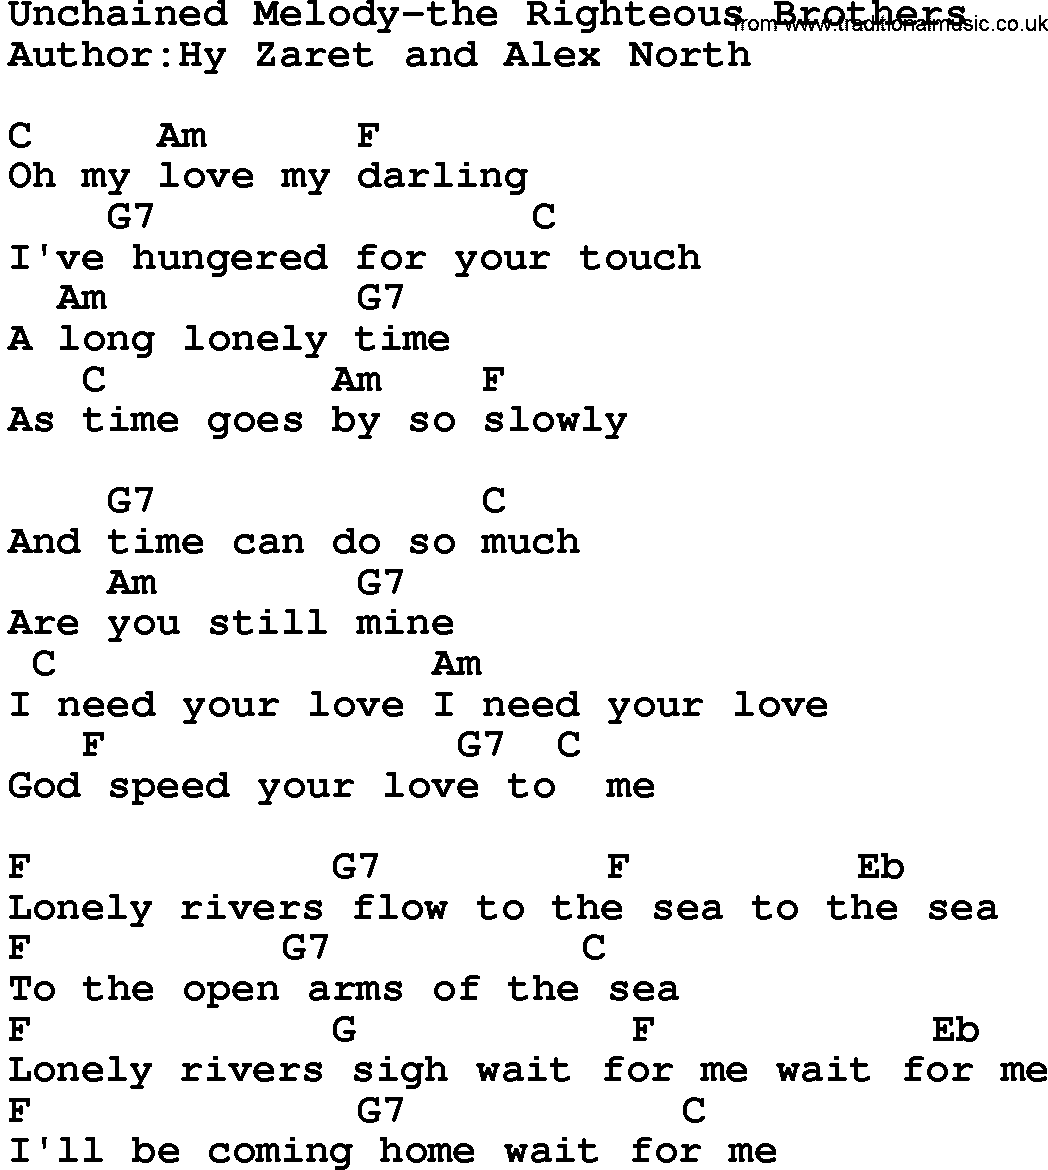 Country music song: Unchained Melody-The Righteous Brothers lyrics and chords